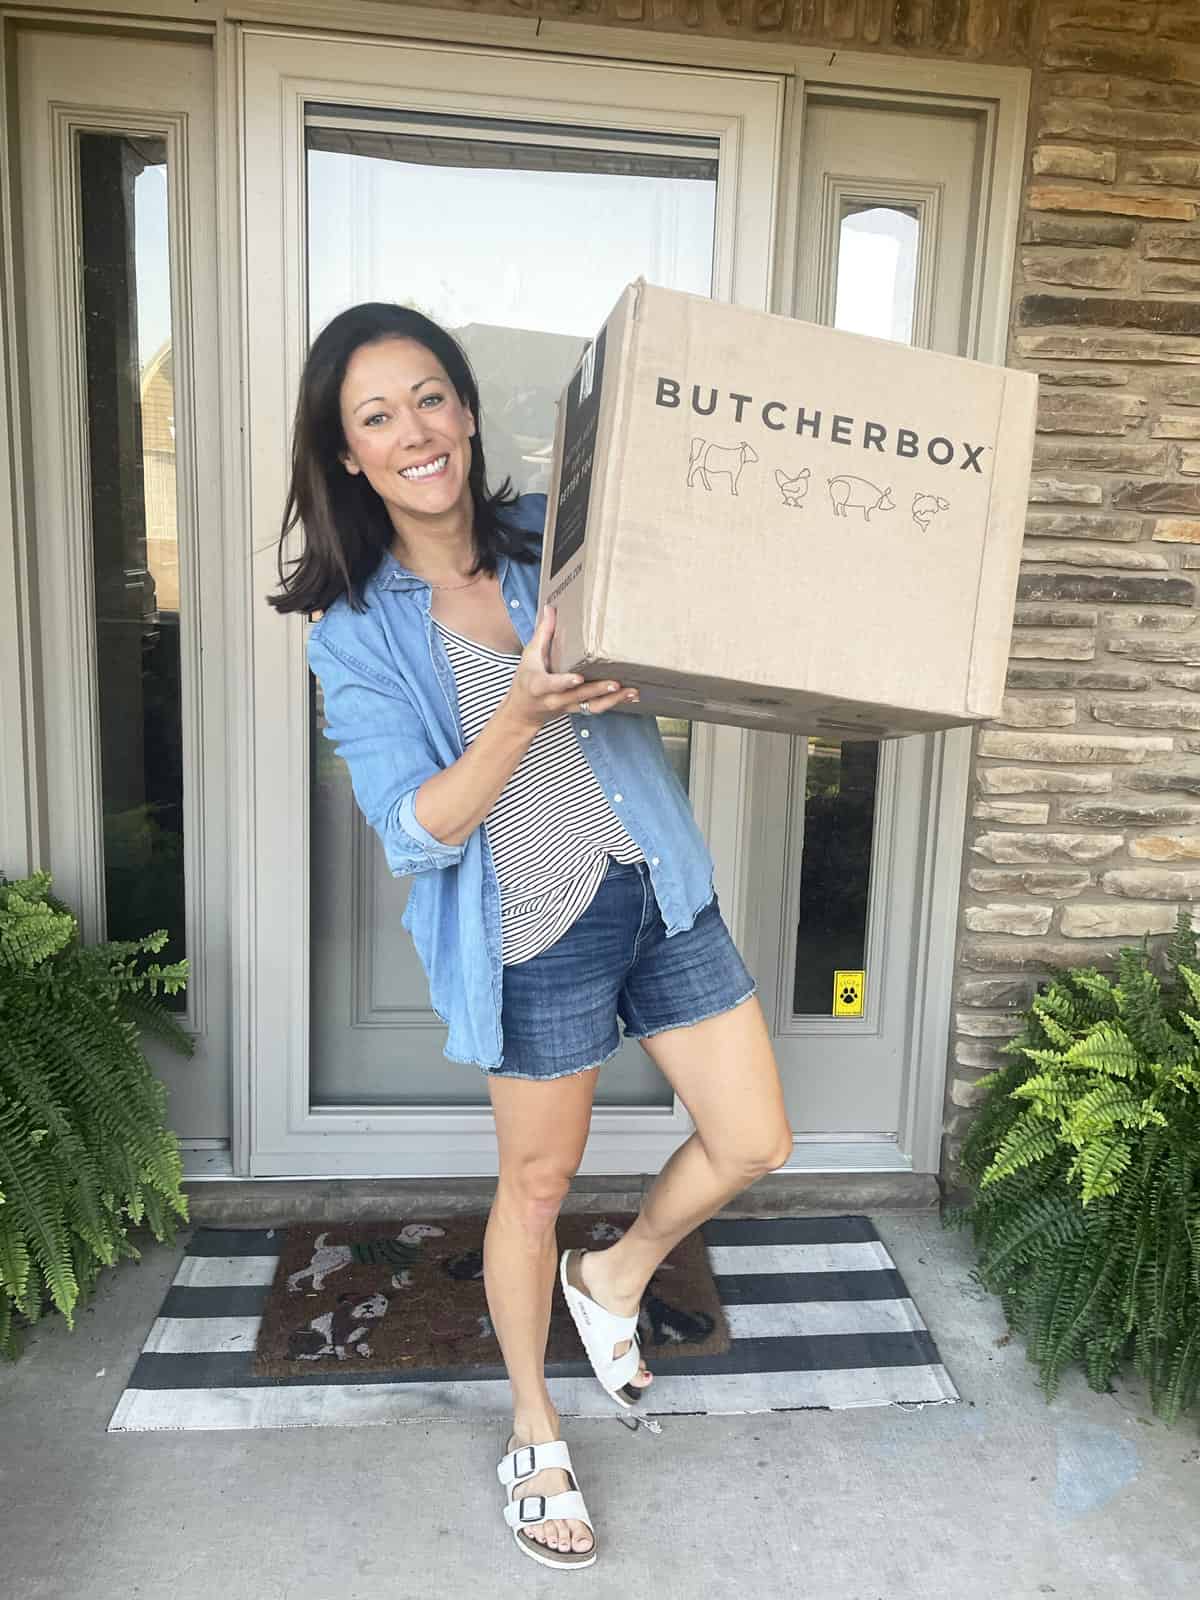 Polly Conner on her front porch holding a butcherbox